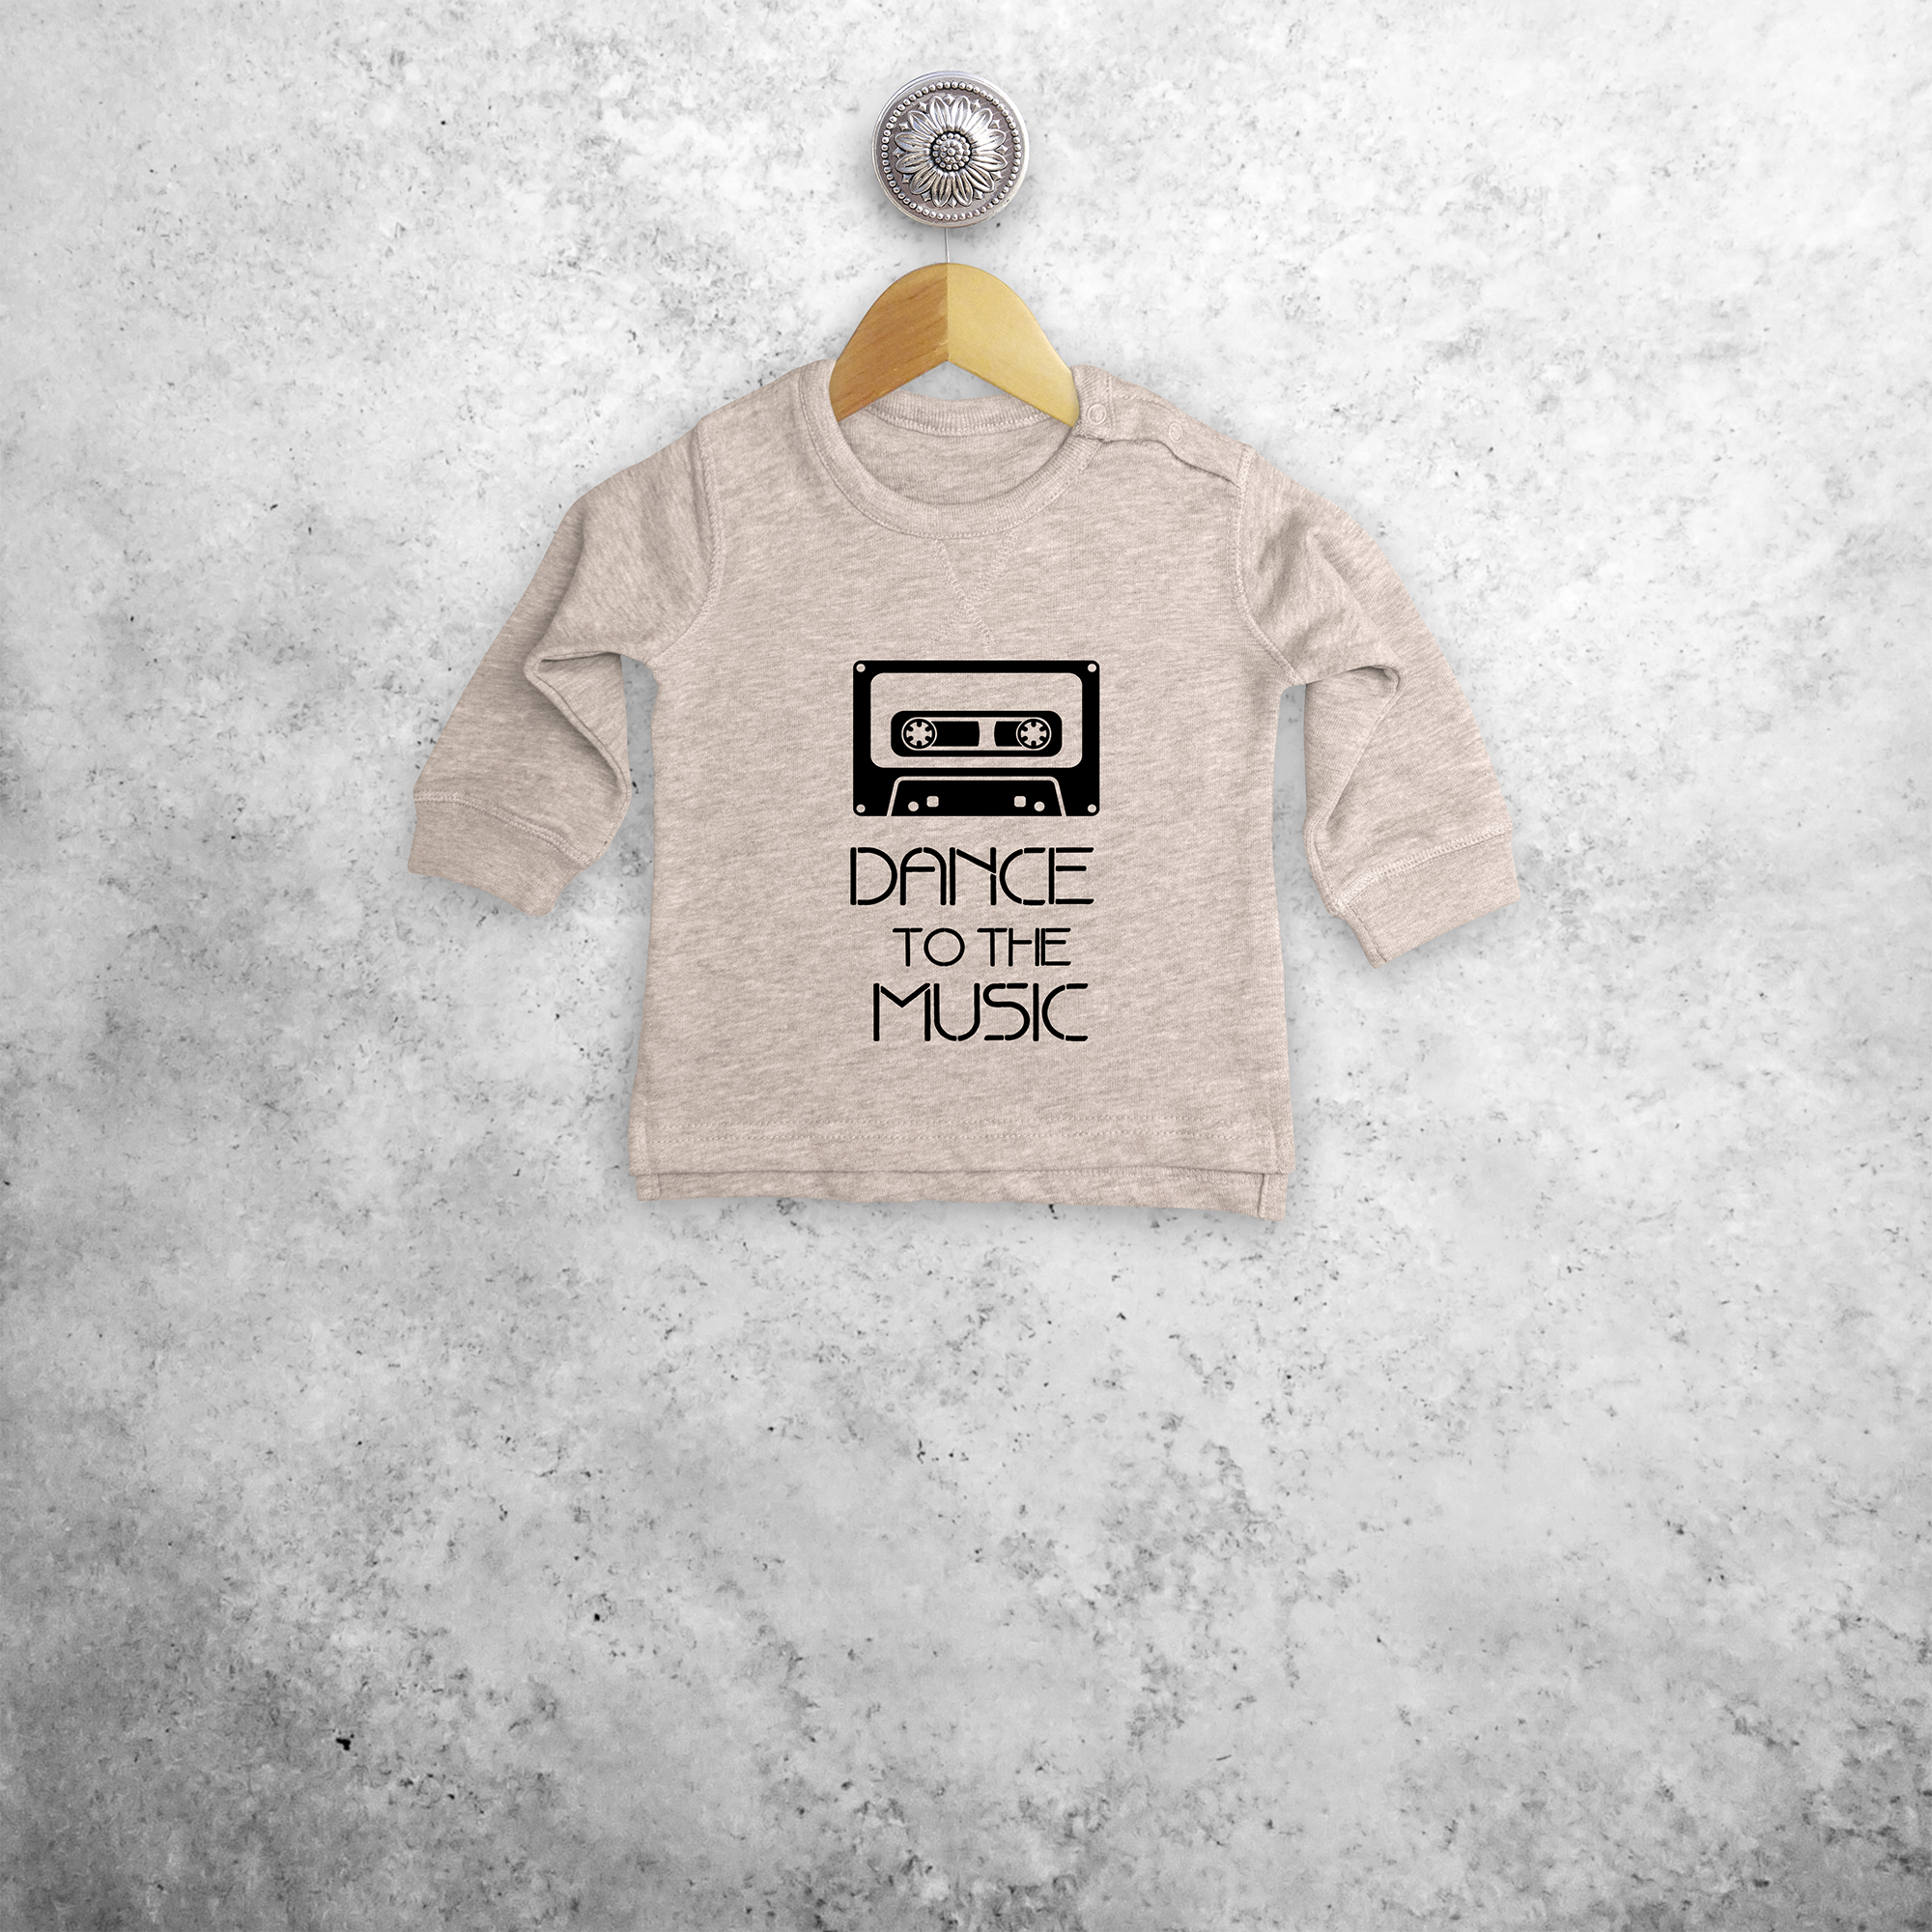 'Dance to the music' baby sweater